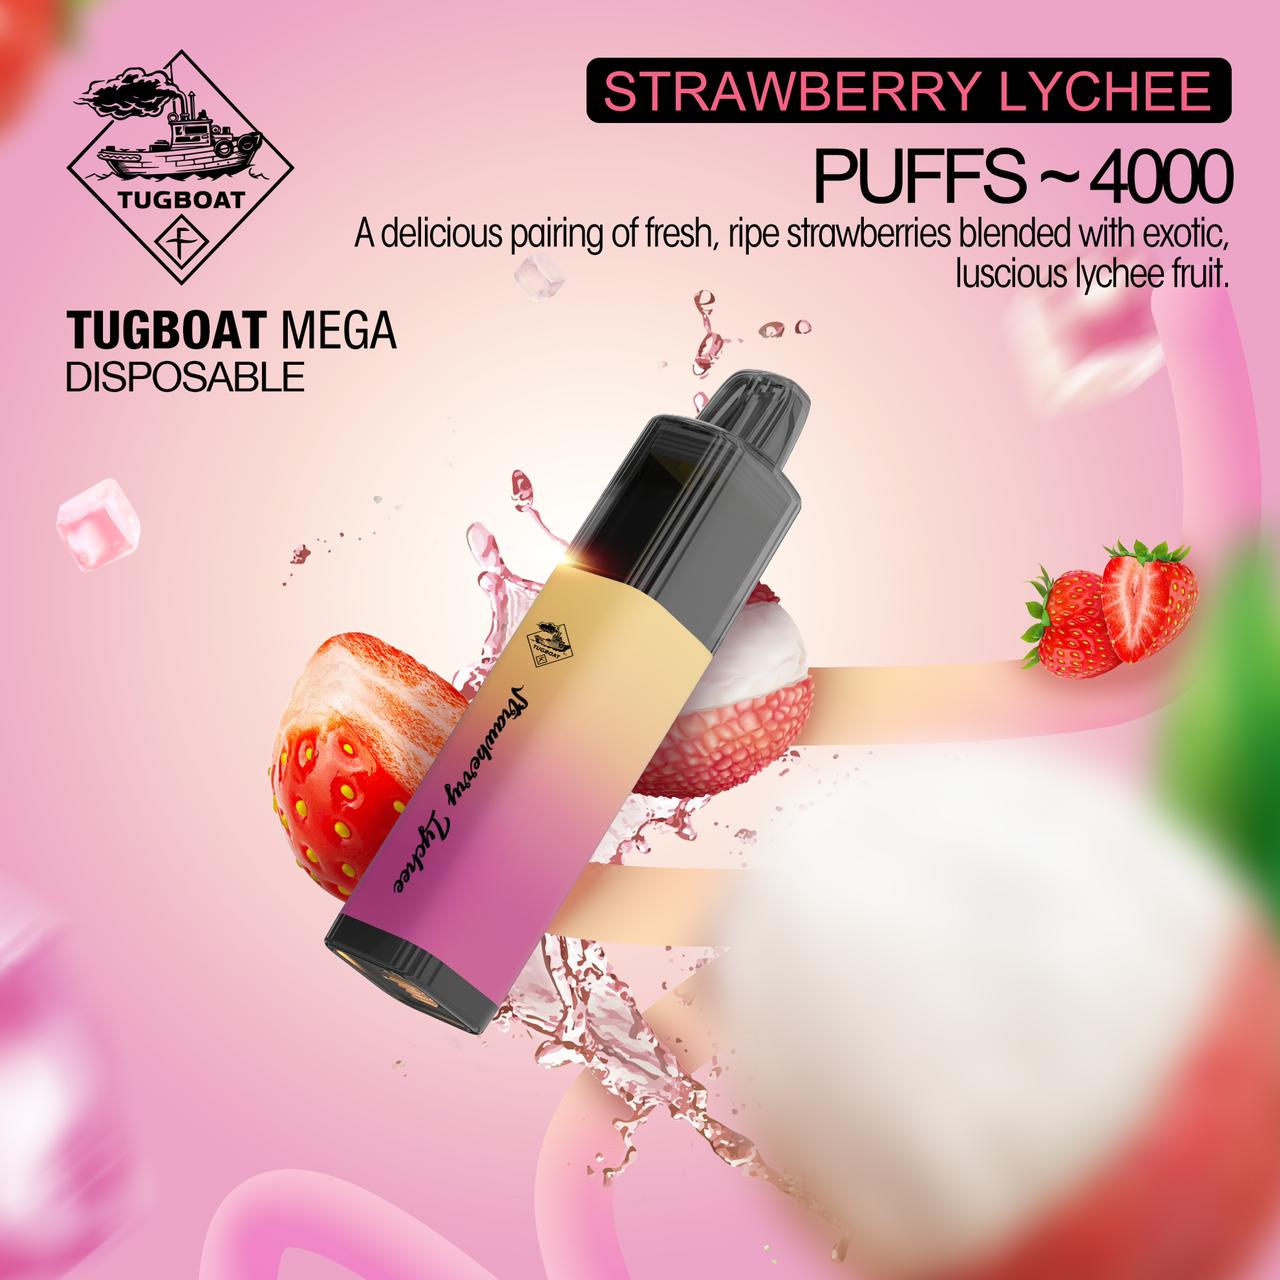 TUGBOAT MEGA DISPOSABLE STRAWBERRY LYCHEE PUFFS 4000